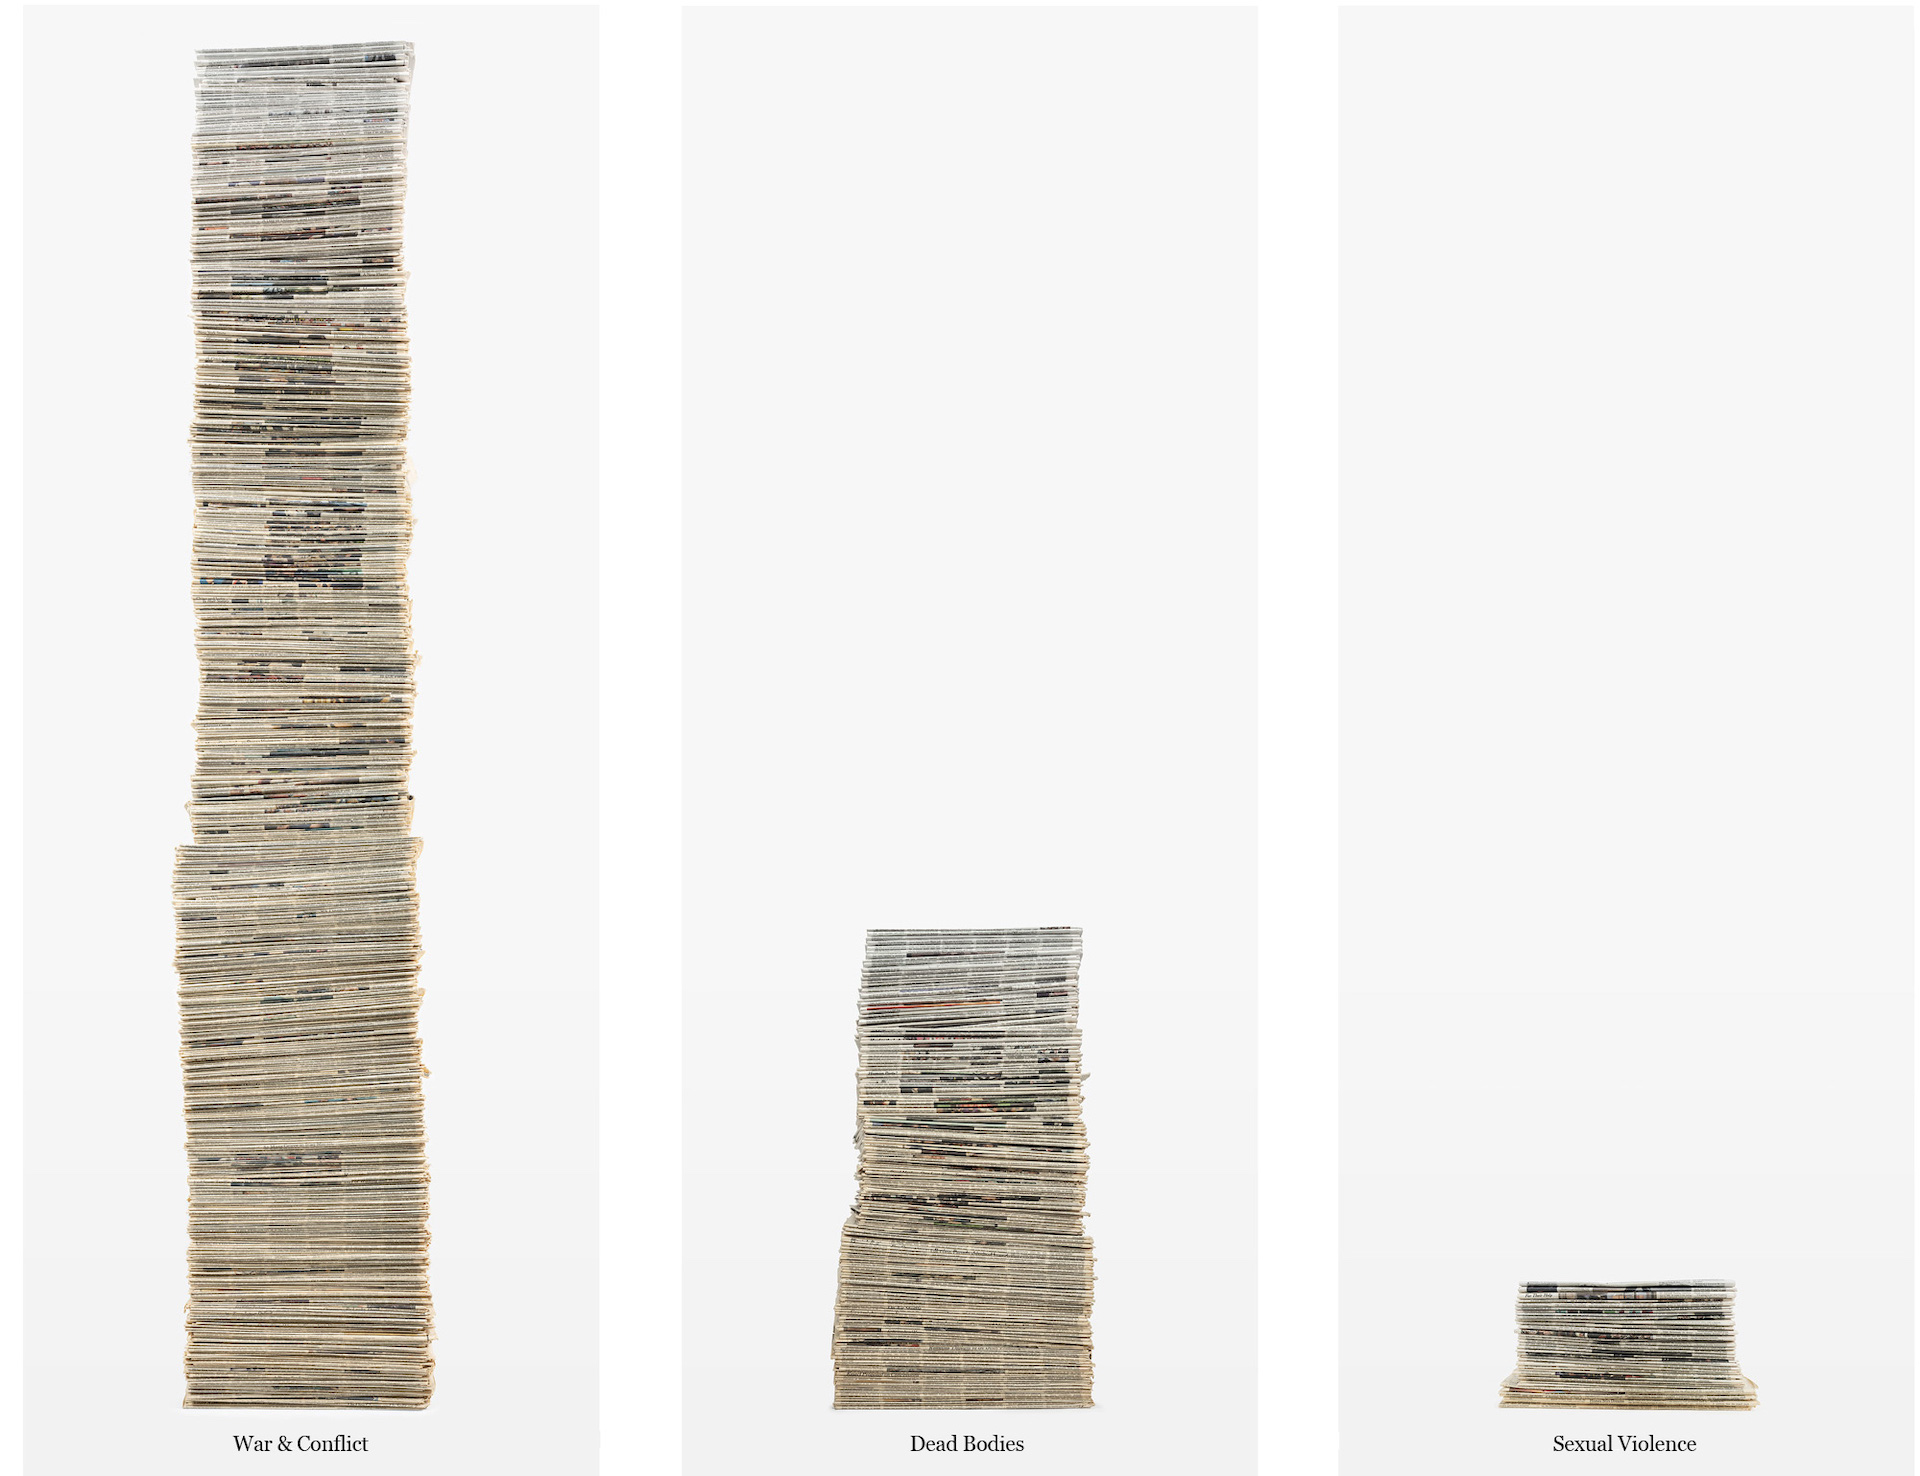 Three stacks of newspapers depict quantitatively the stories posted in the news, labeled in decreasing order as: "war & conflict", "dead bodies", "sexual violence"